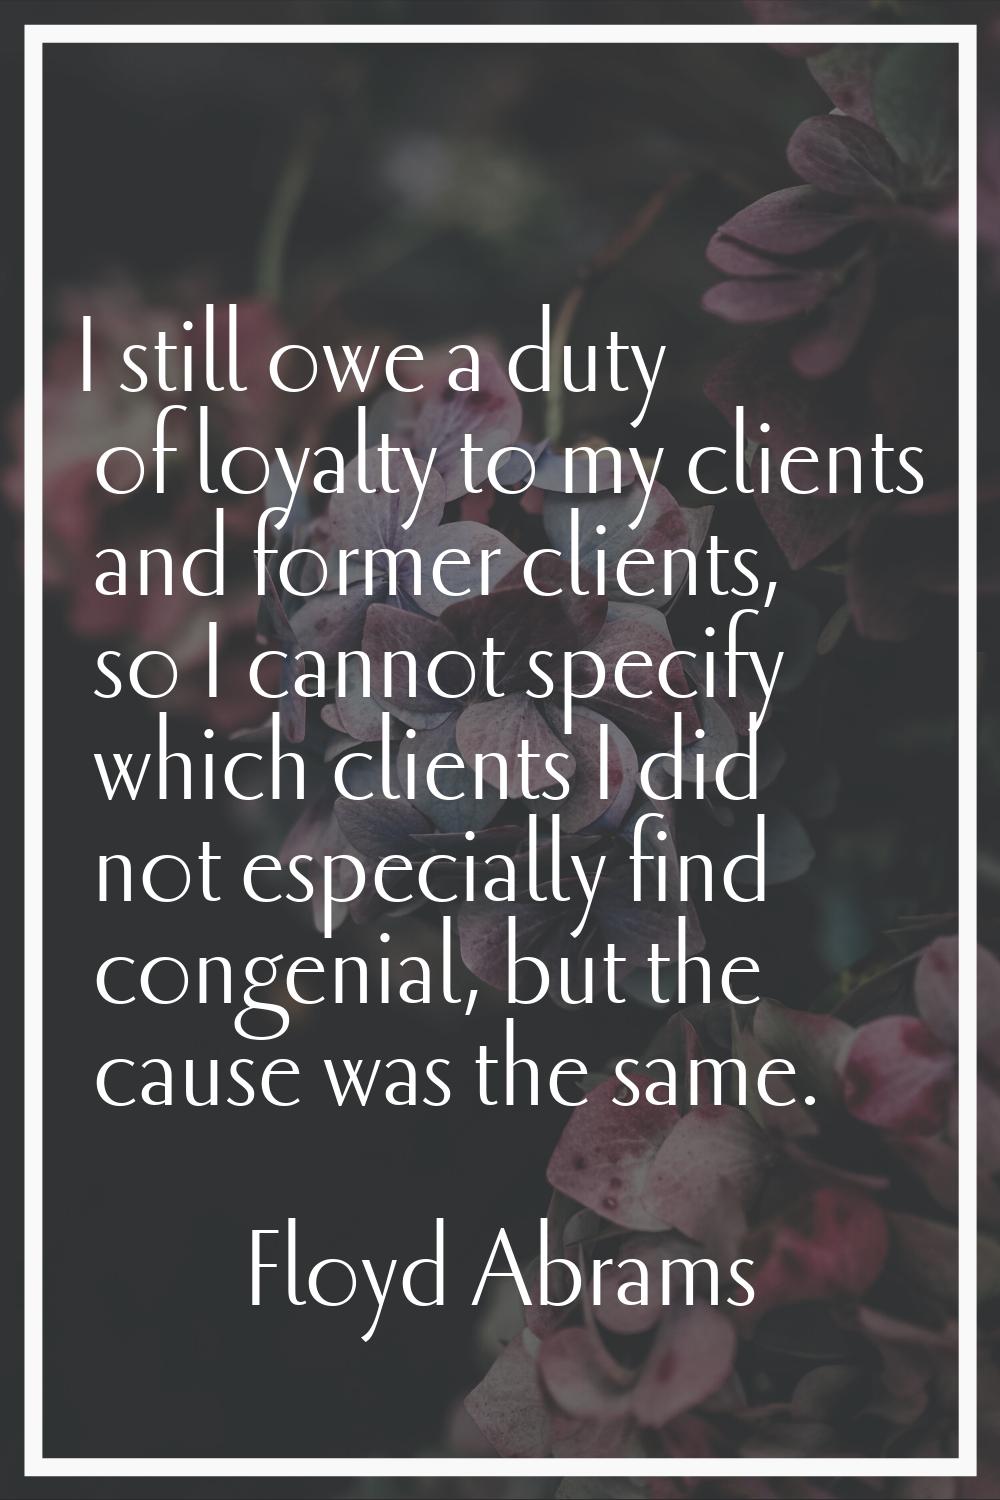 I still owe a duty of loyalty to my clients and former clients, so I cannot specify which clients I